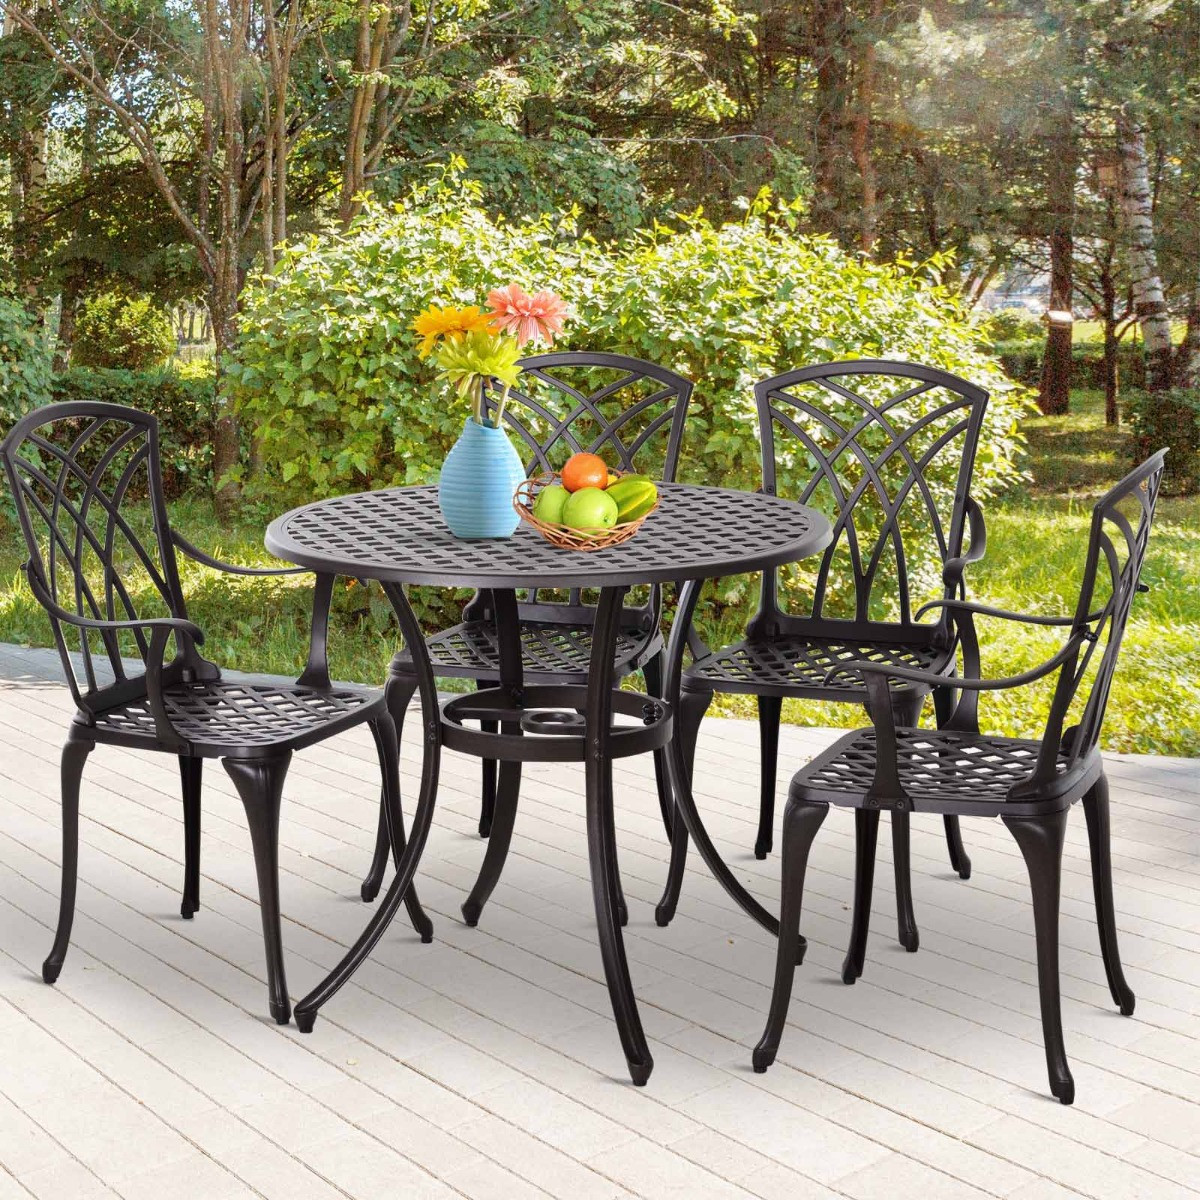 Outsunny Shabby Chic Cast Aluminium Dining Set, 5 Piece - Brown>